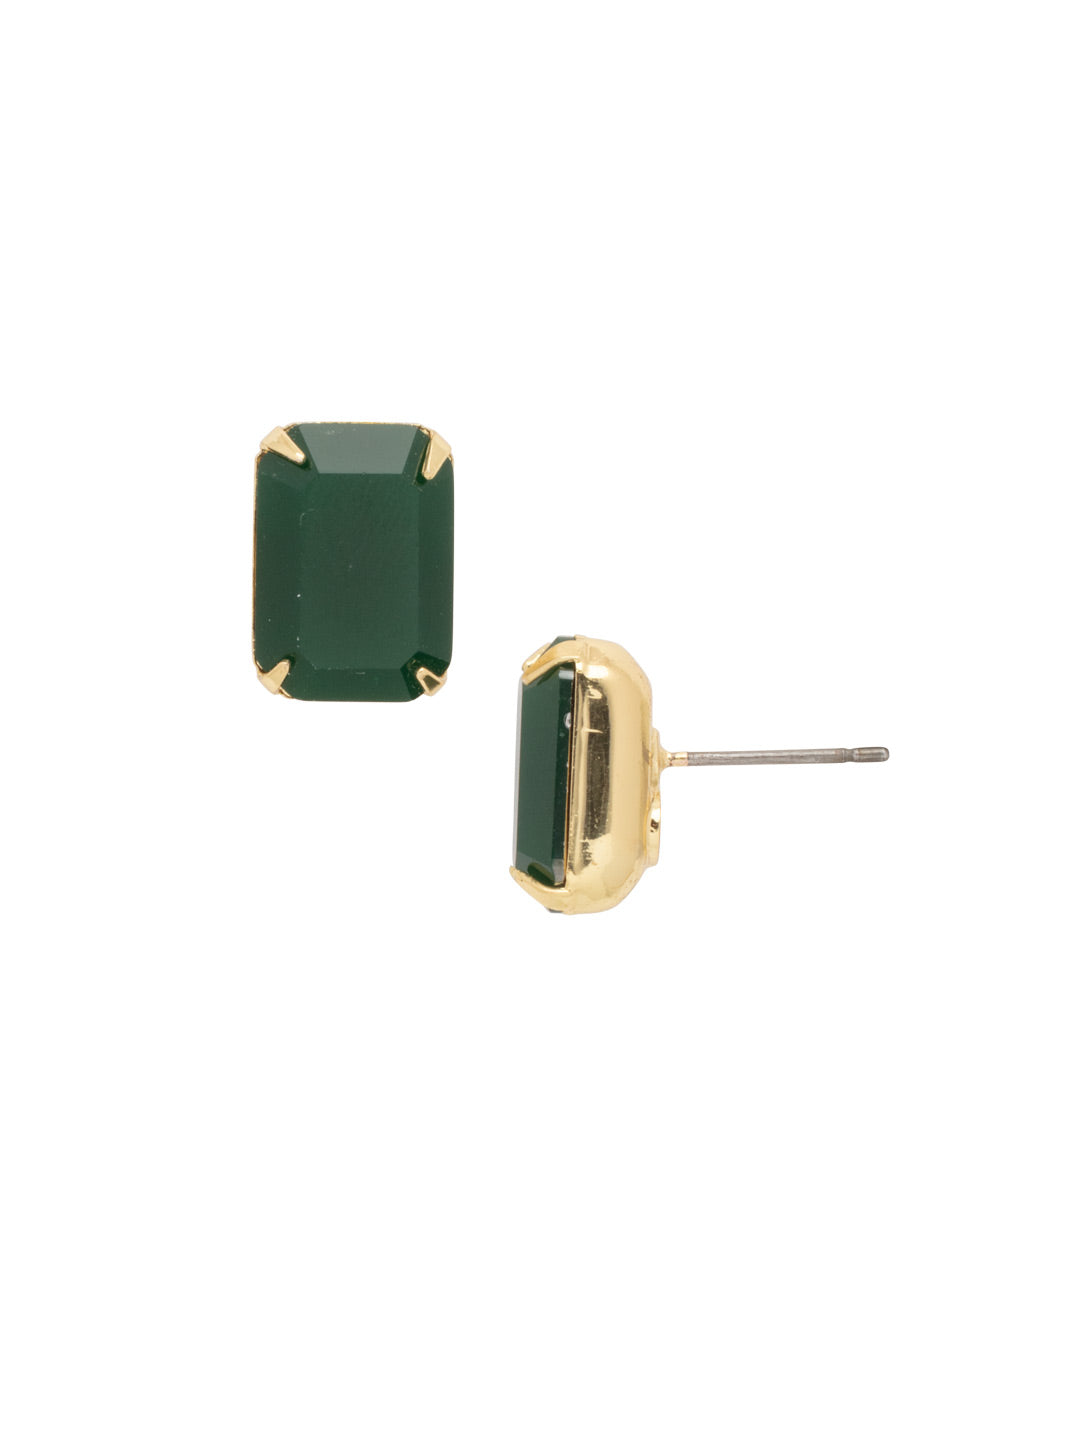 Everyday Stud Earrings - ECT11BGPGO - <p>Simple studs never go out of style! Try this single cut crystal on a post for everyday sparkle. From Sorrelli's Palace Green Opal collection in our Bright Gold-tone finish.</p>